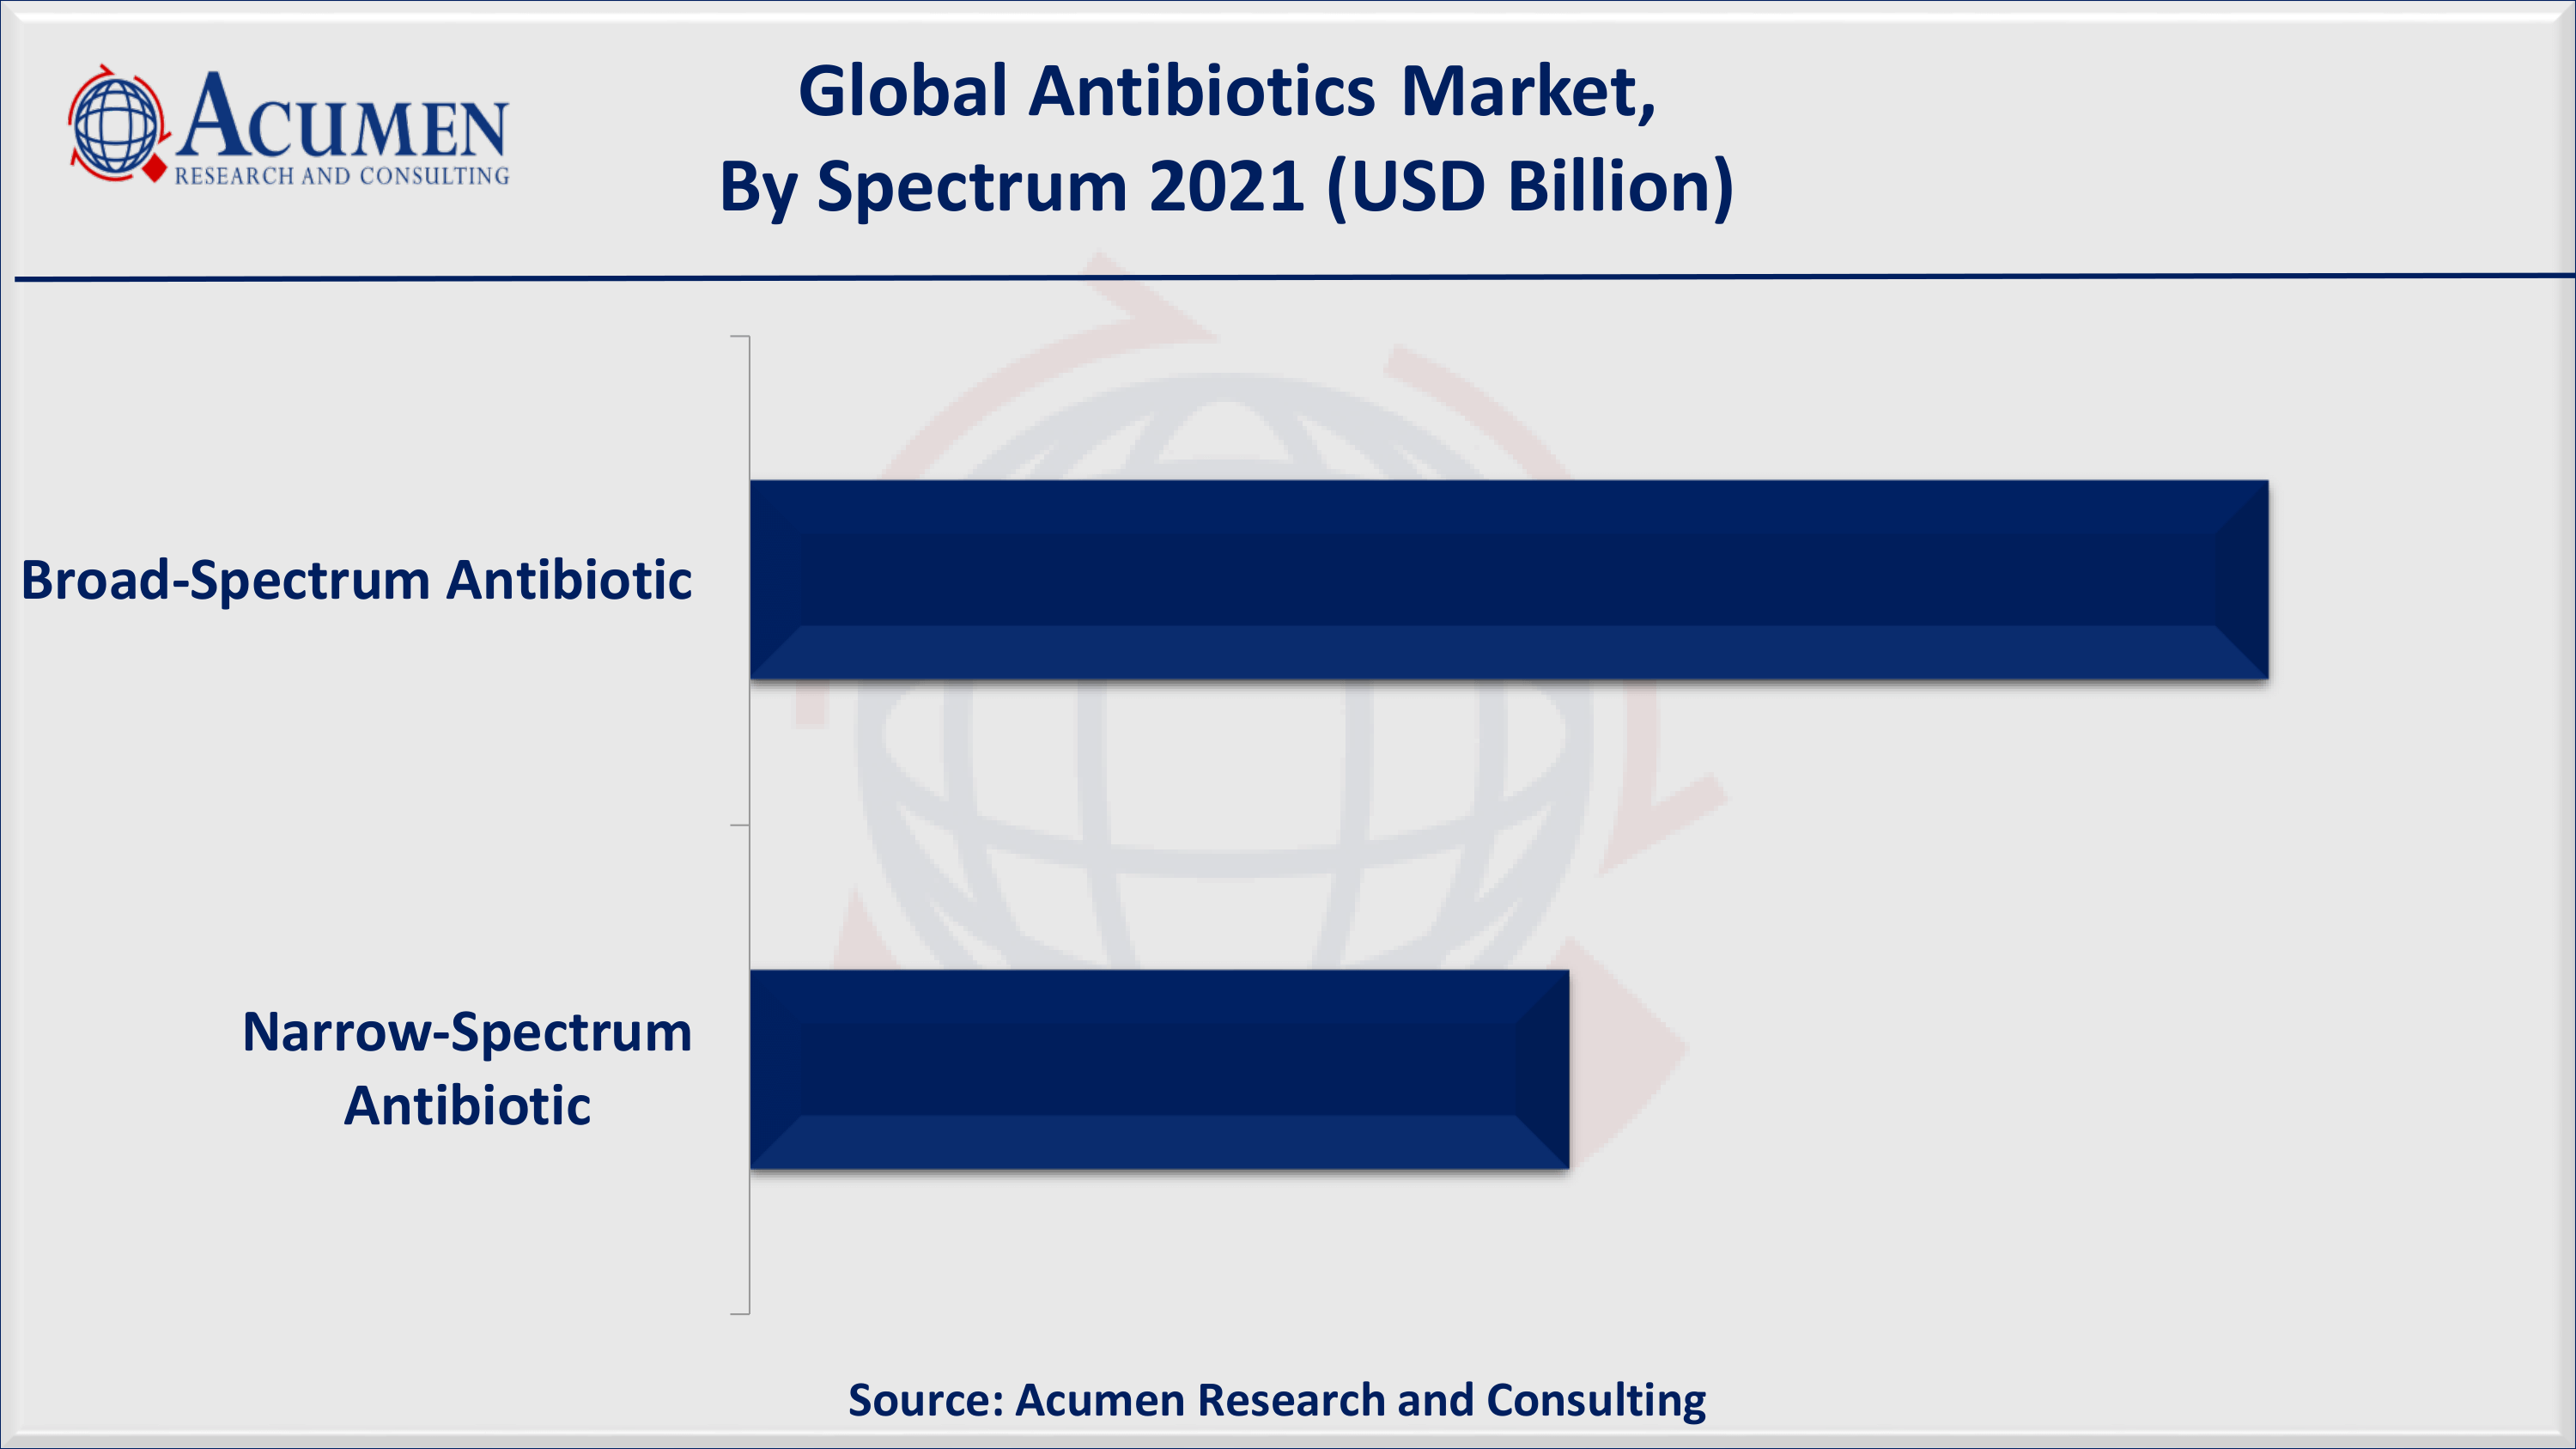 According to the University of Oxford, global antibiotic consumption rates increased by 46% between 2000 and 2018